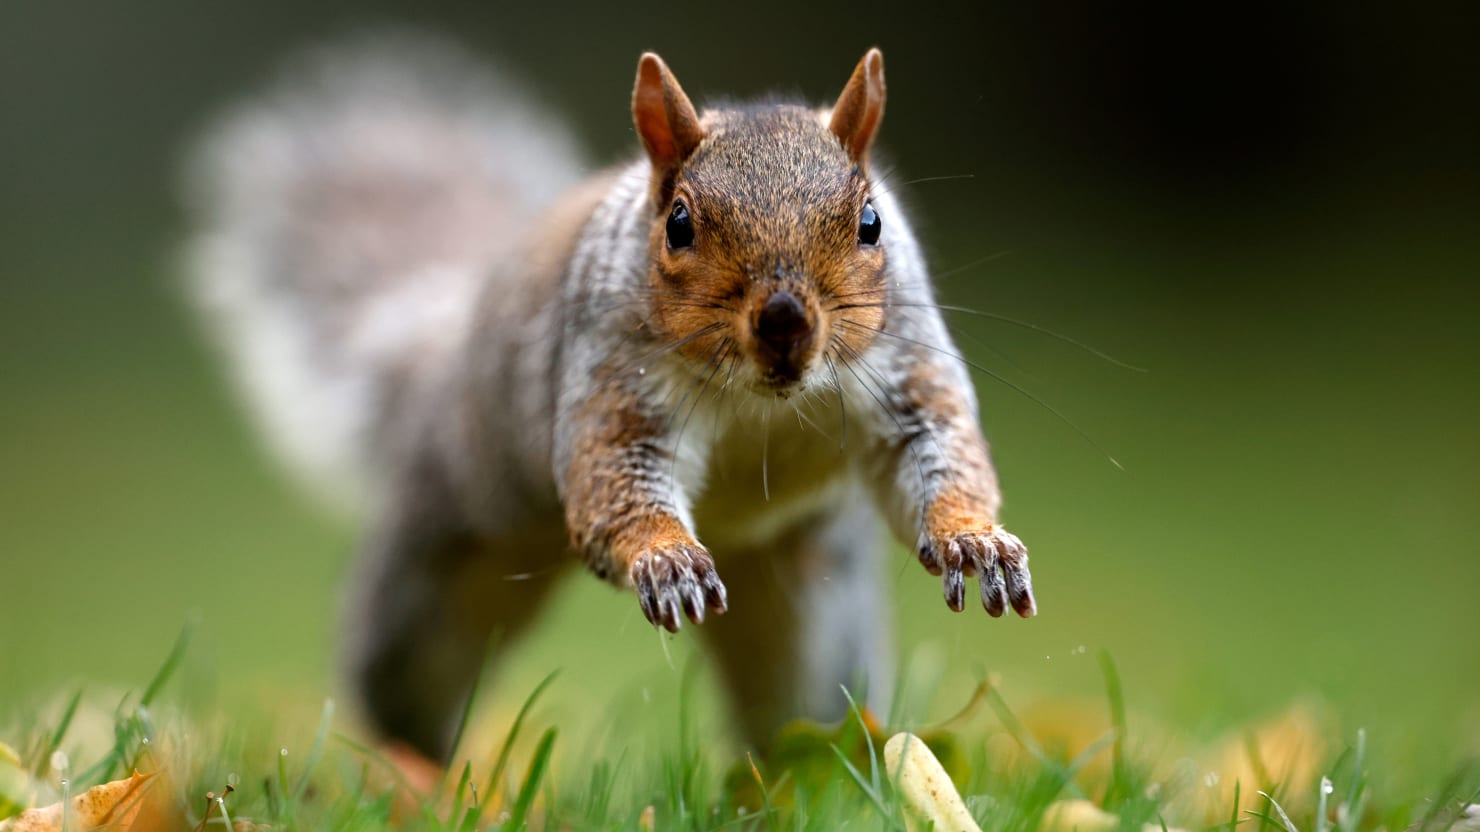 Furious squirrel accused of carrying out a series of frantic attacks on New Yorkers in Queens